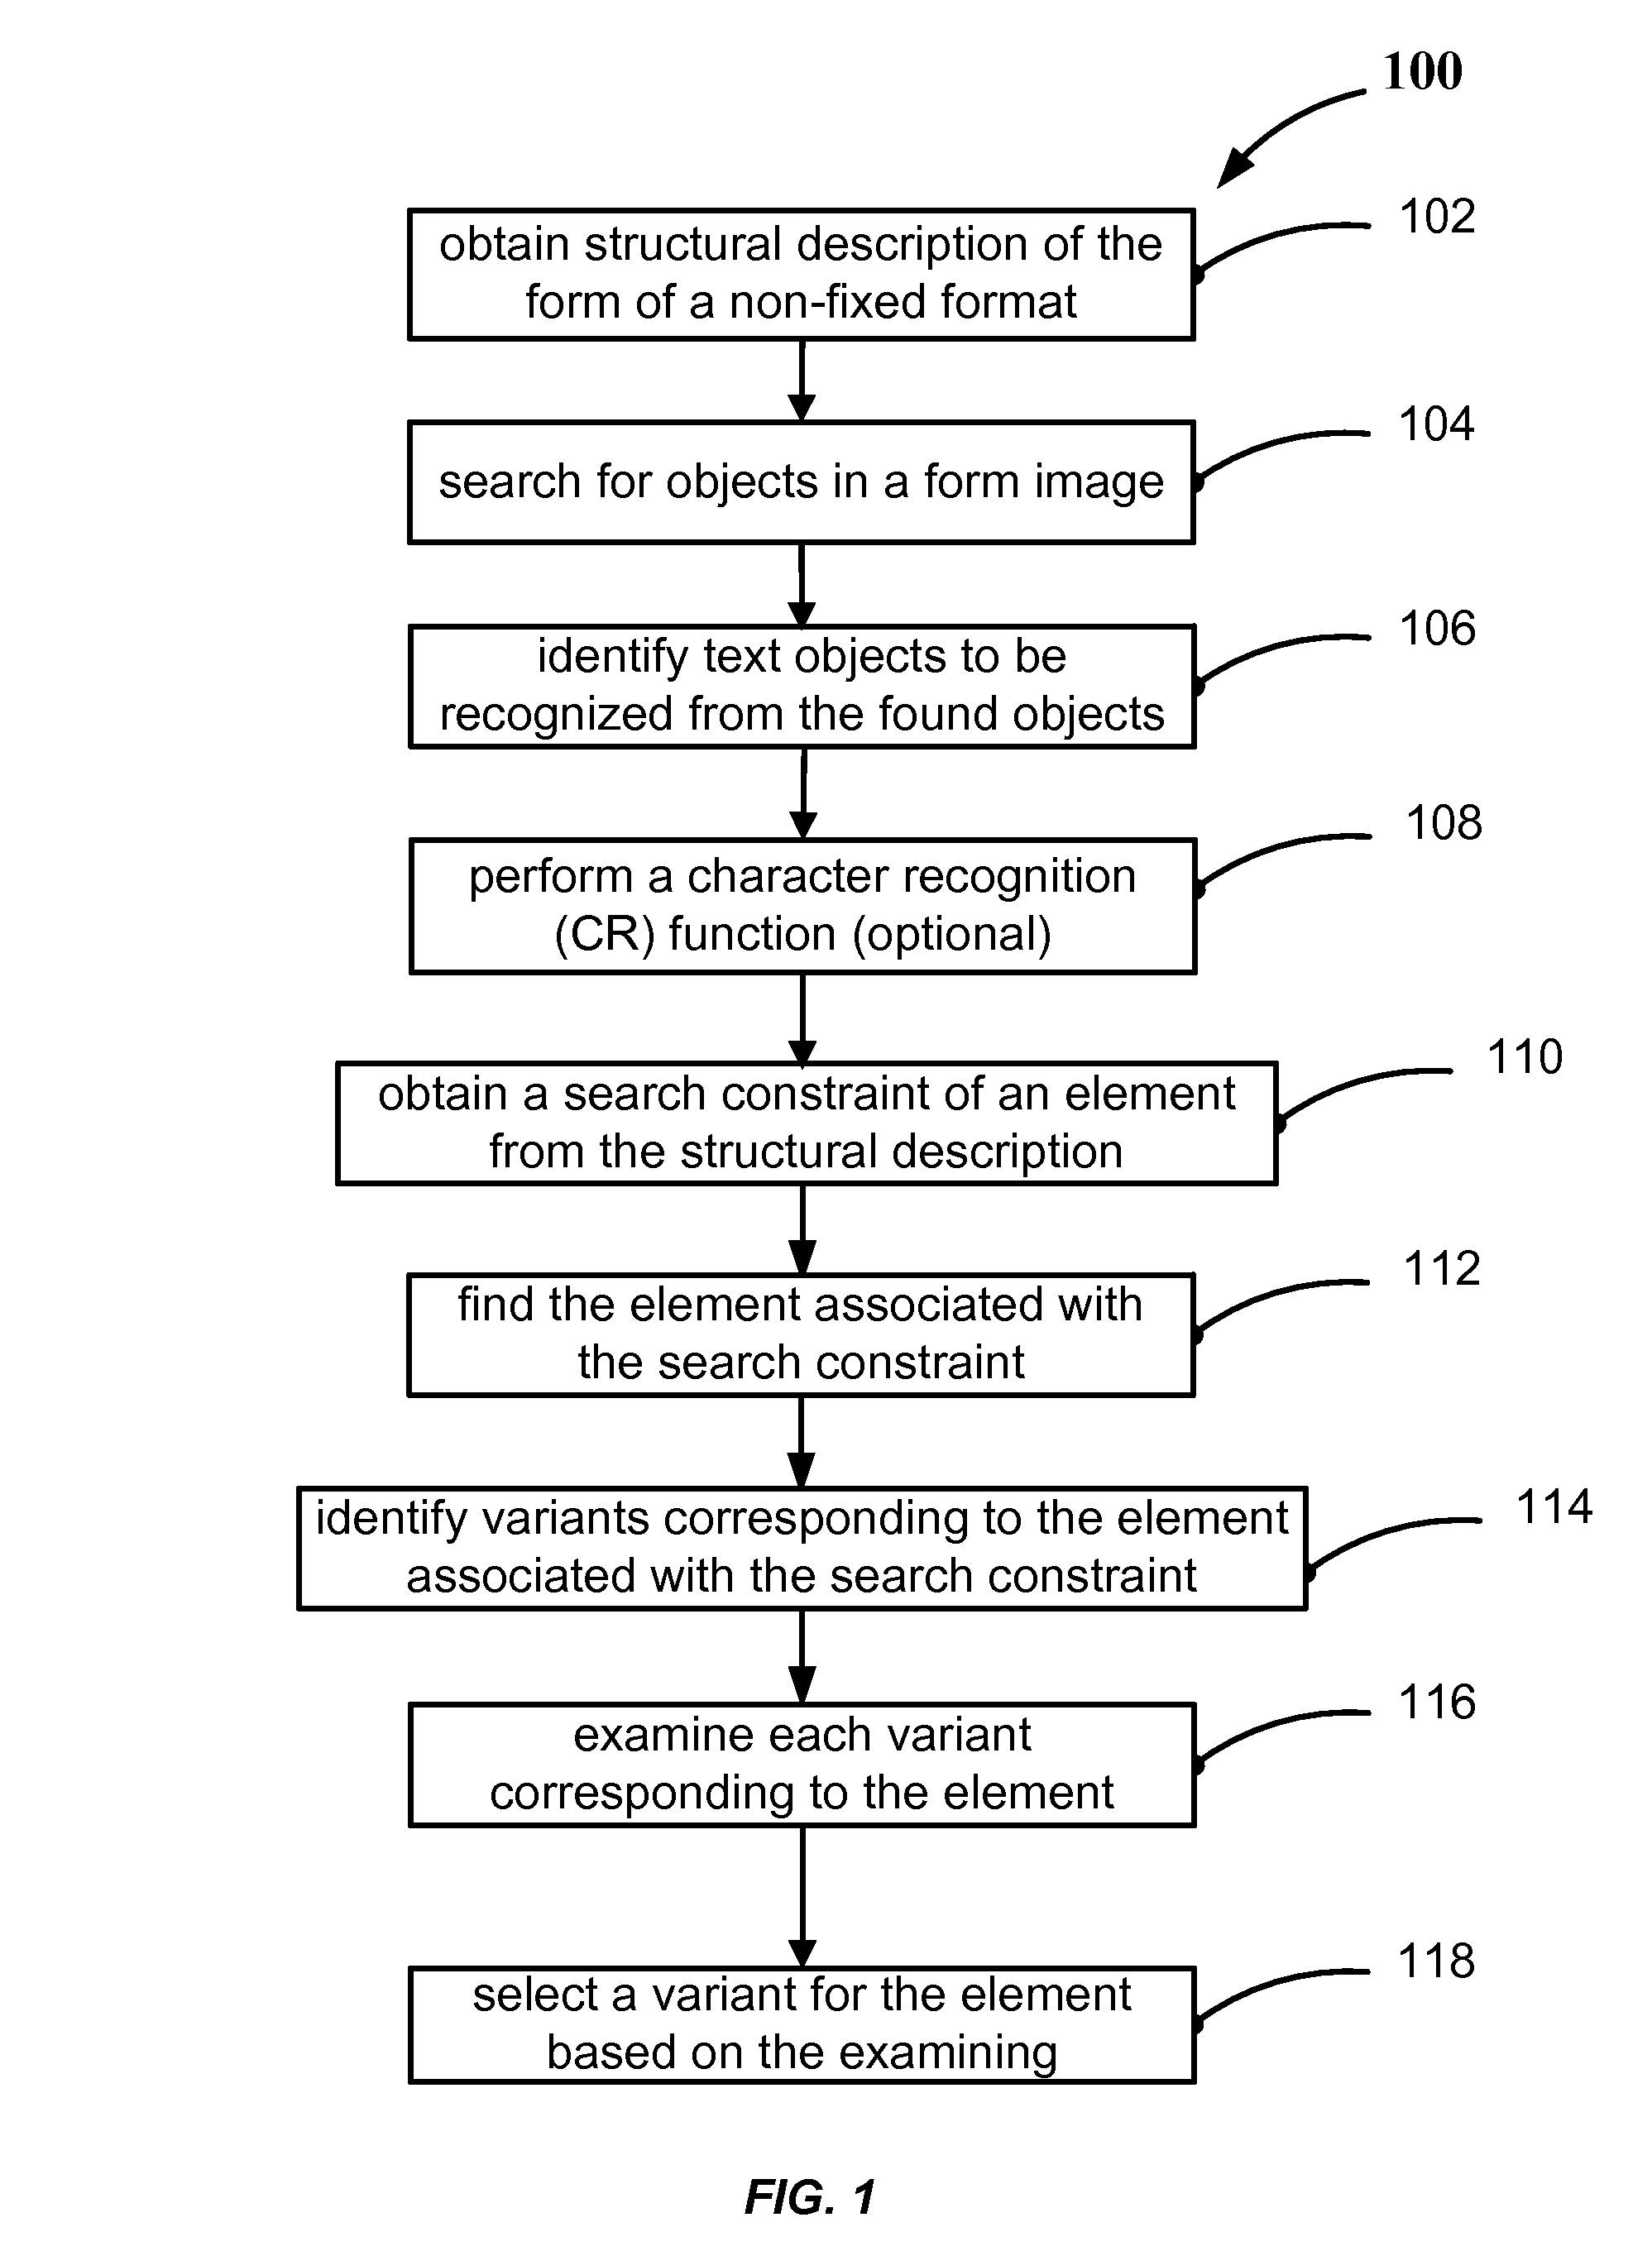 Object recognition and describing structure of graphical objects